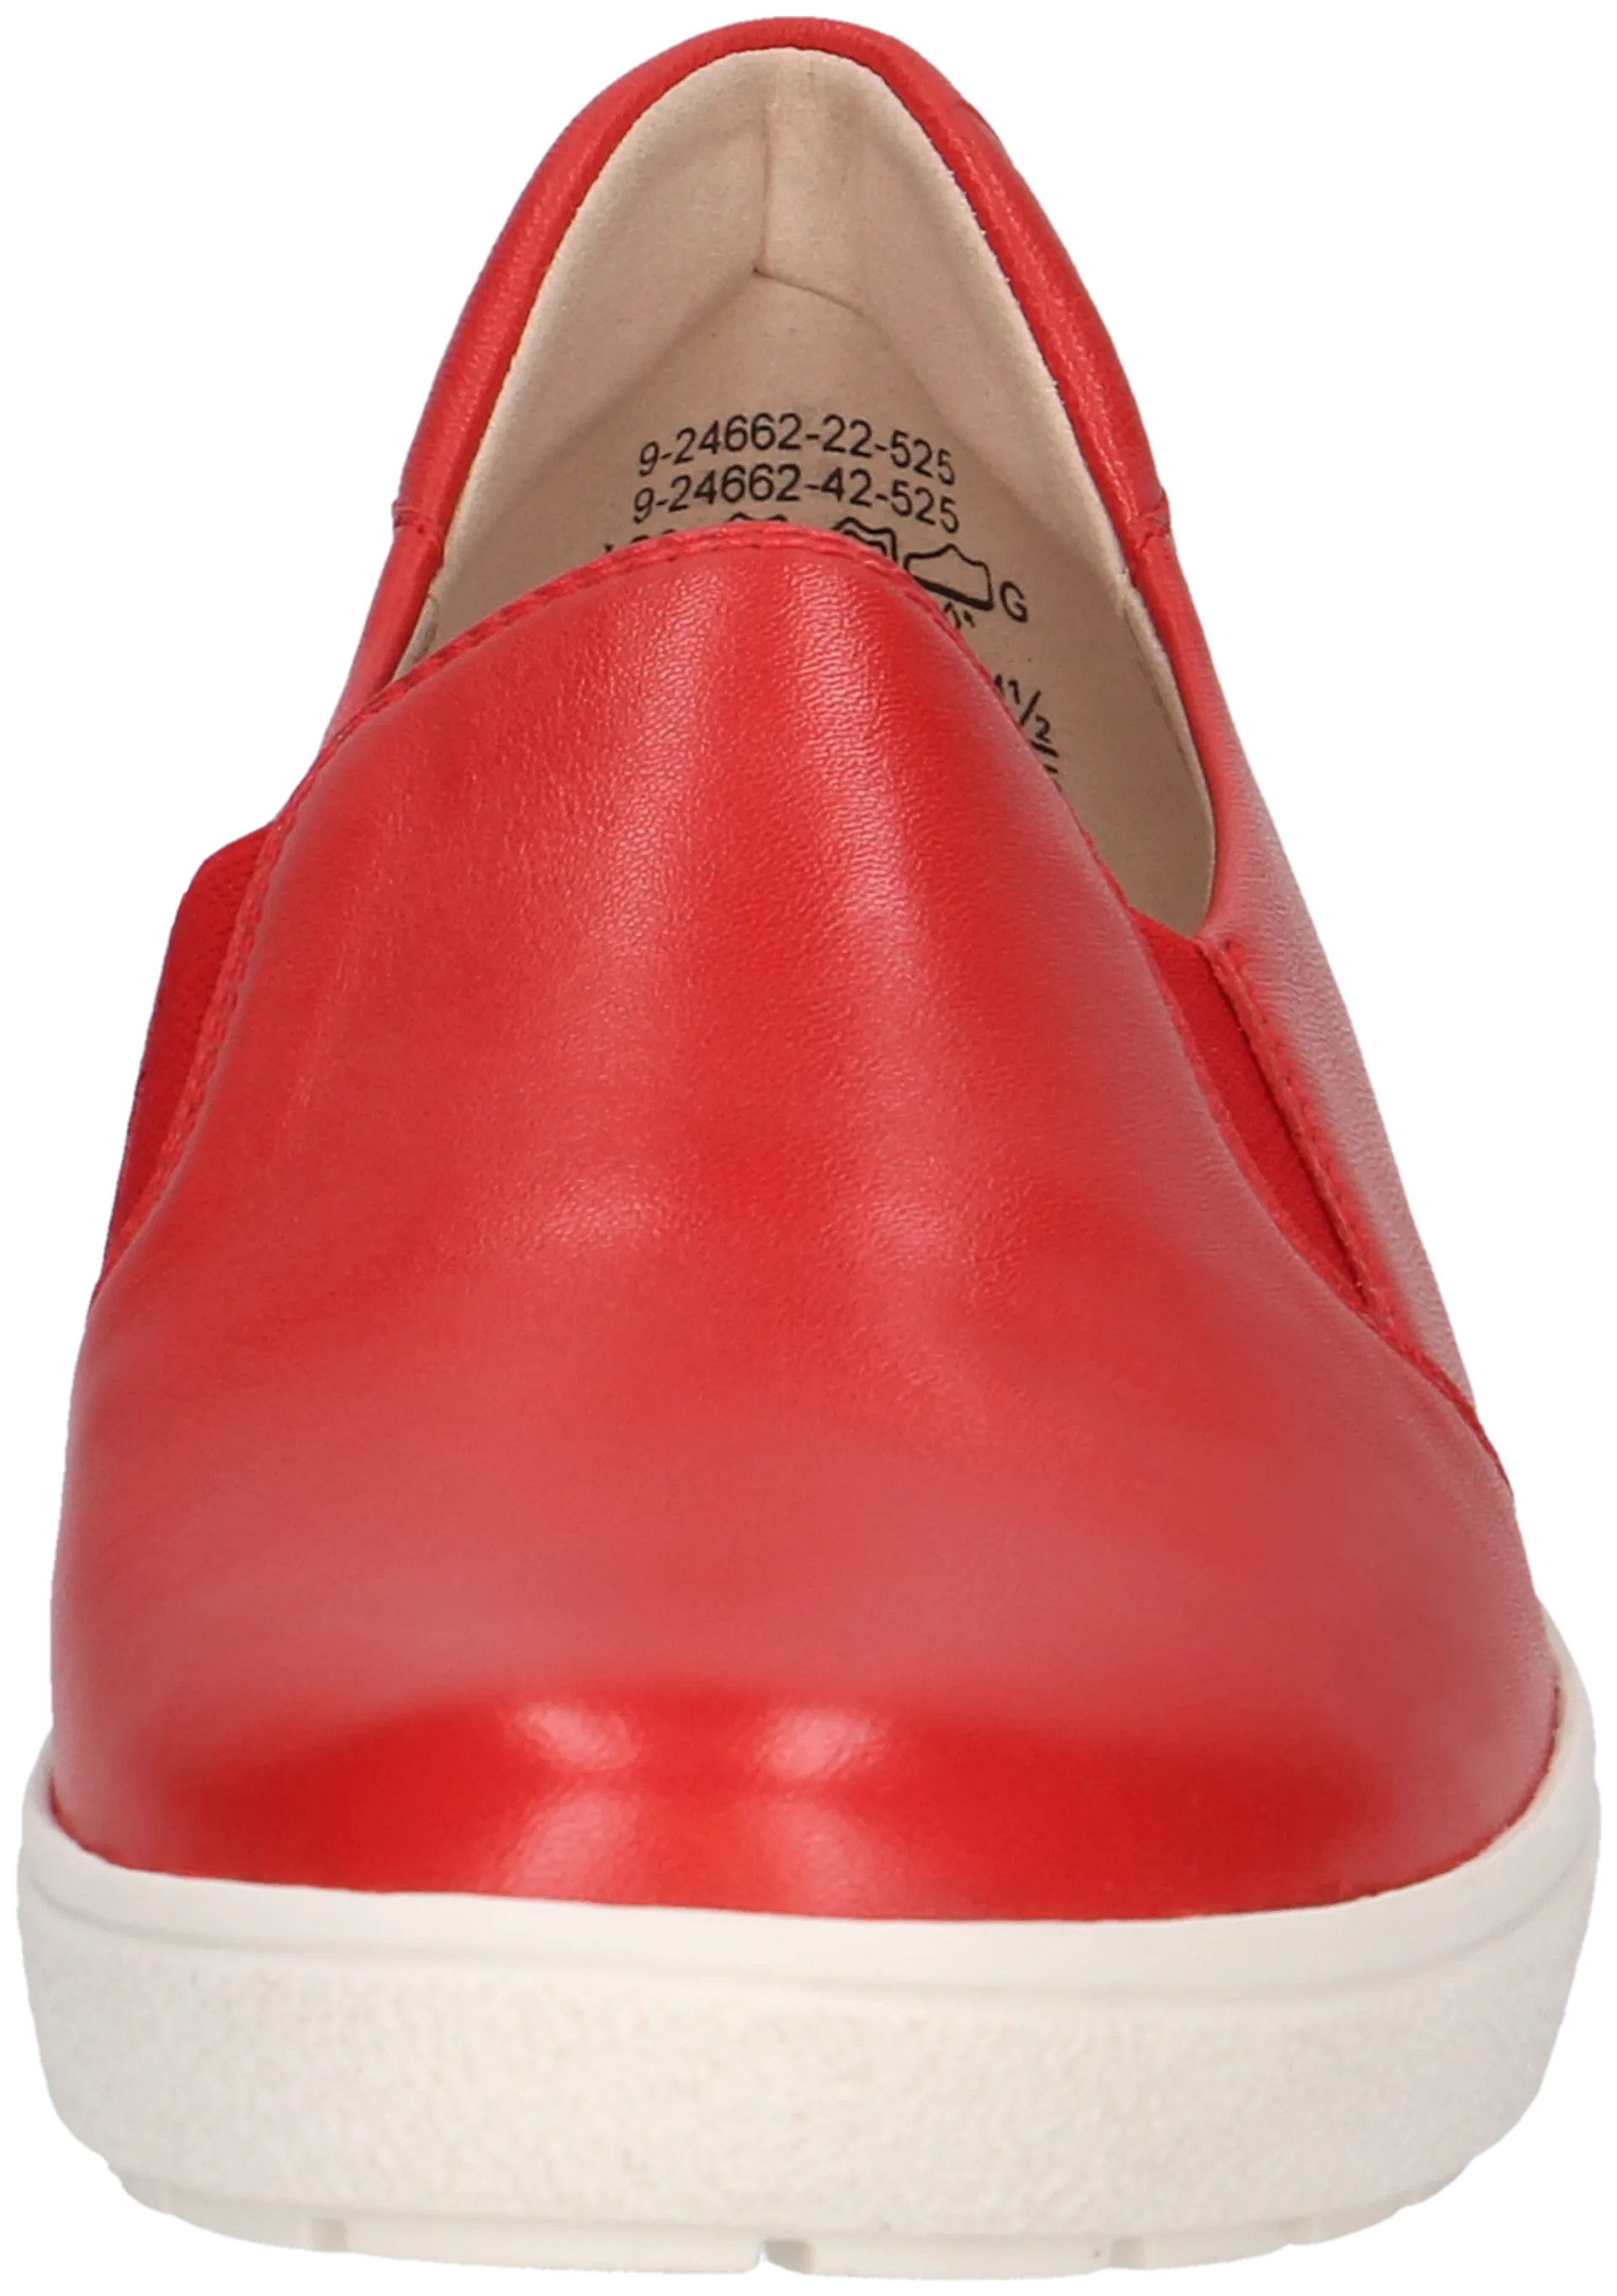 Caprice naisten loafer - Red softnappa - 2